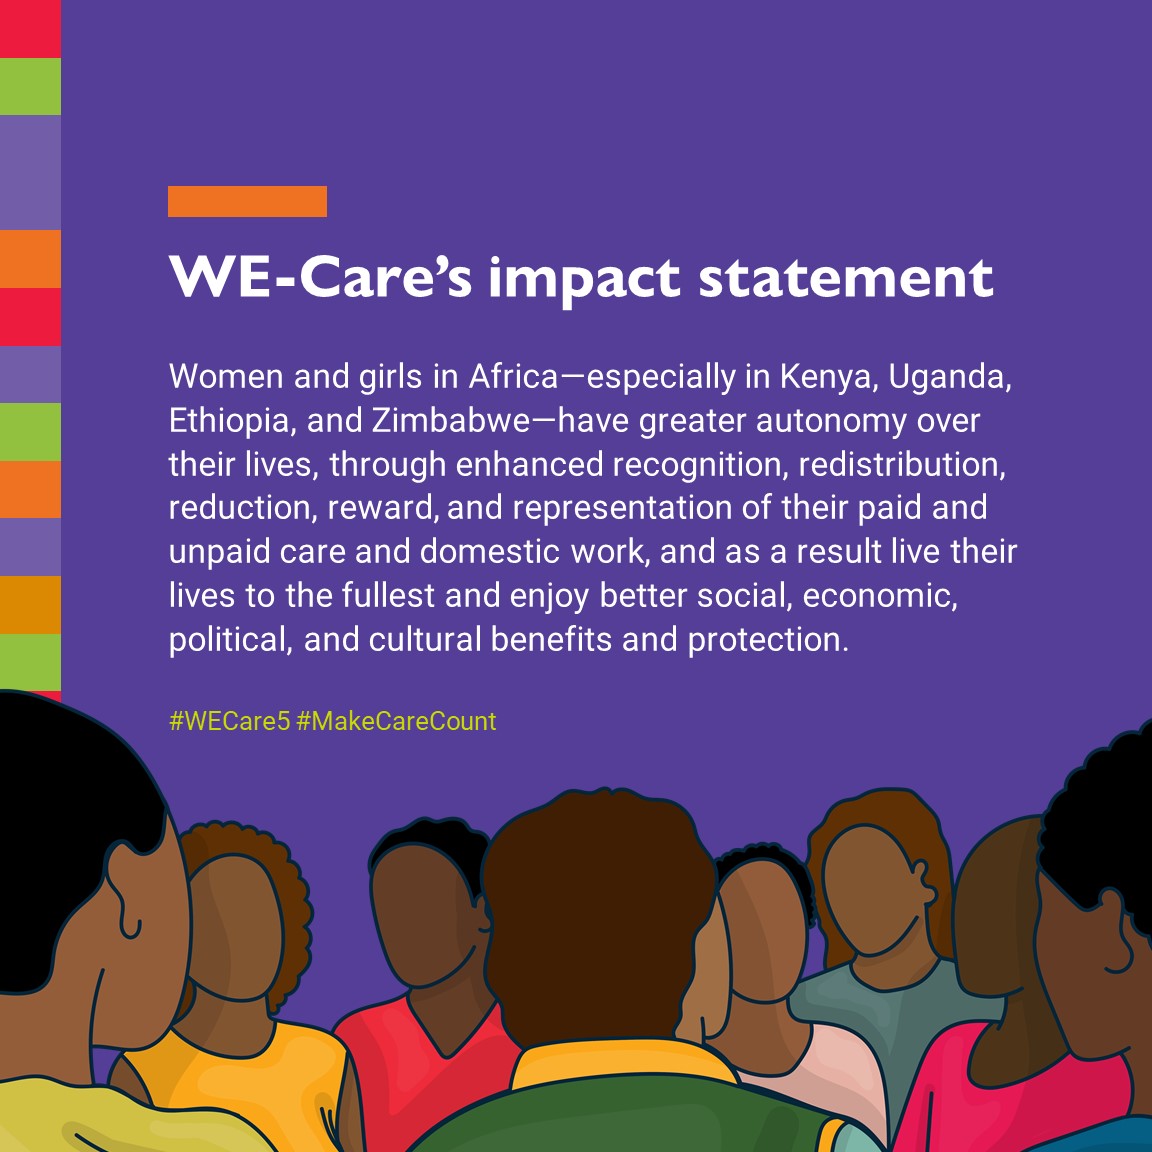 @PadareMen @VingiPaul @Oxfam On its fifth phase, WE-Care will scale up its work, so women and girls in Africa have greater autonomy over their lives. #WECare5